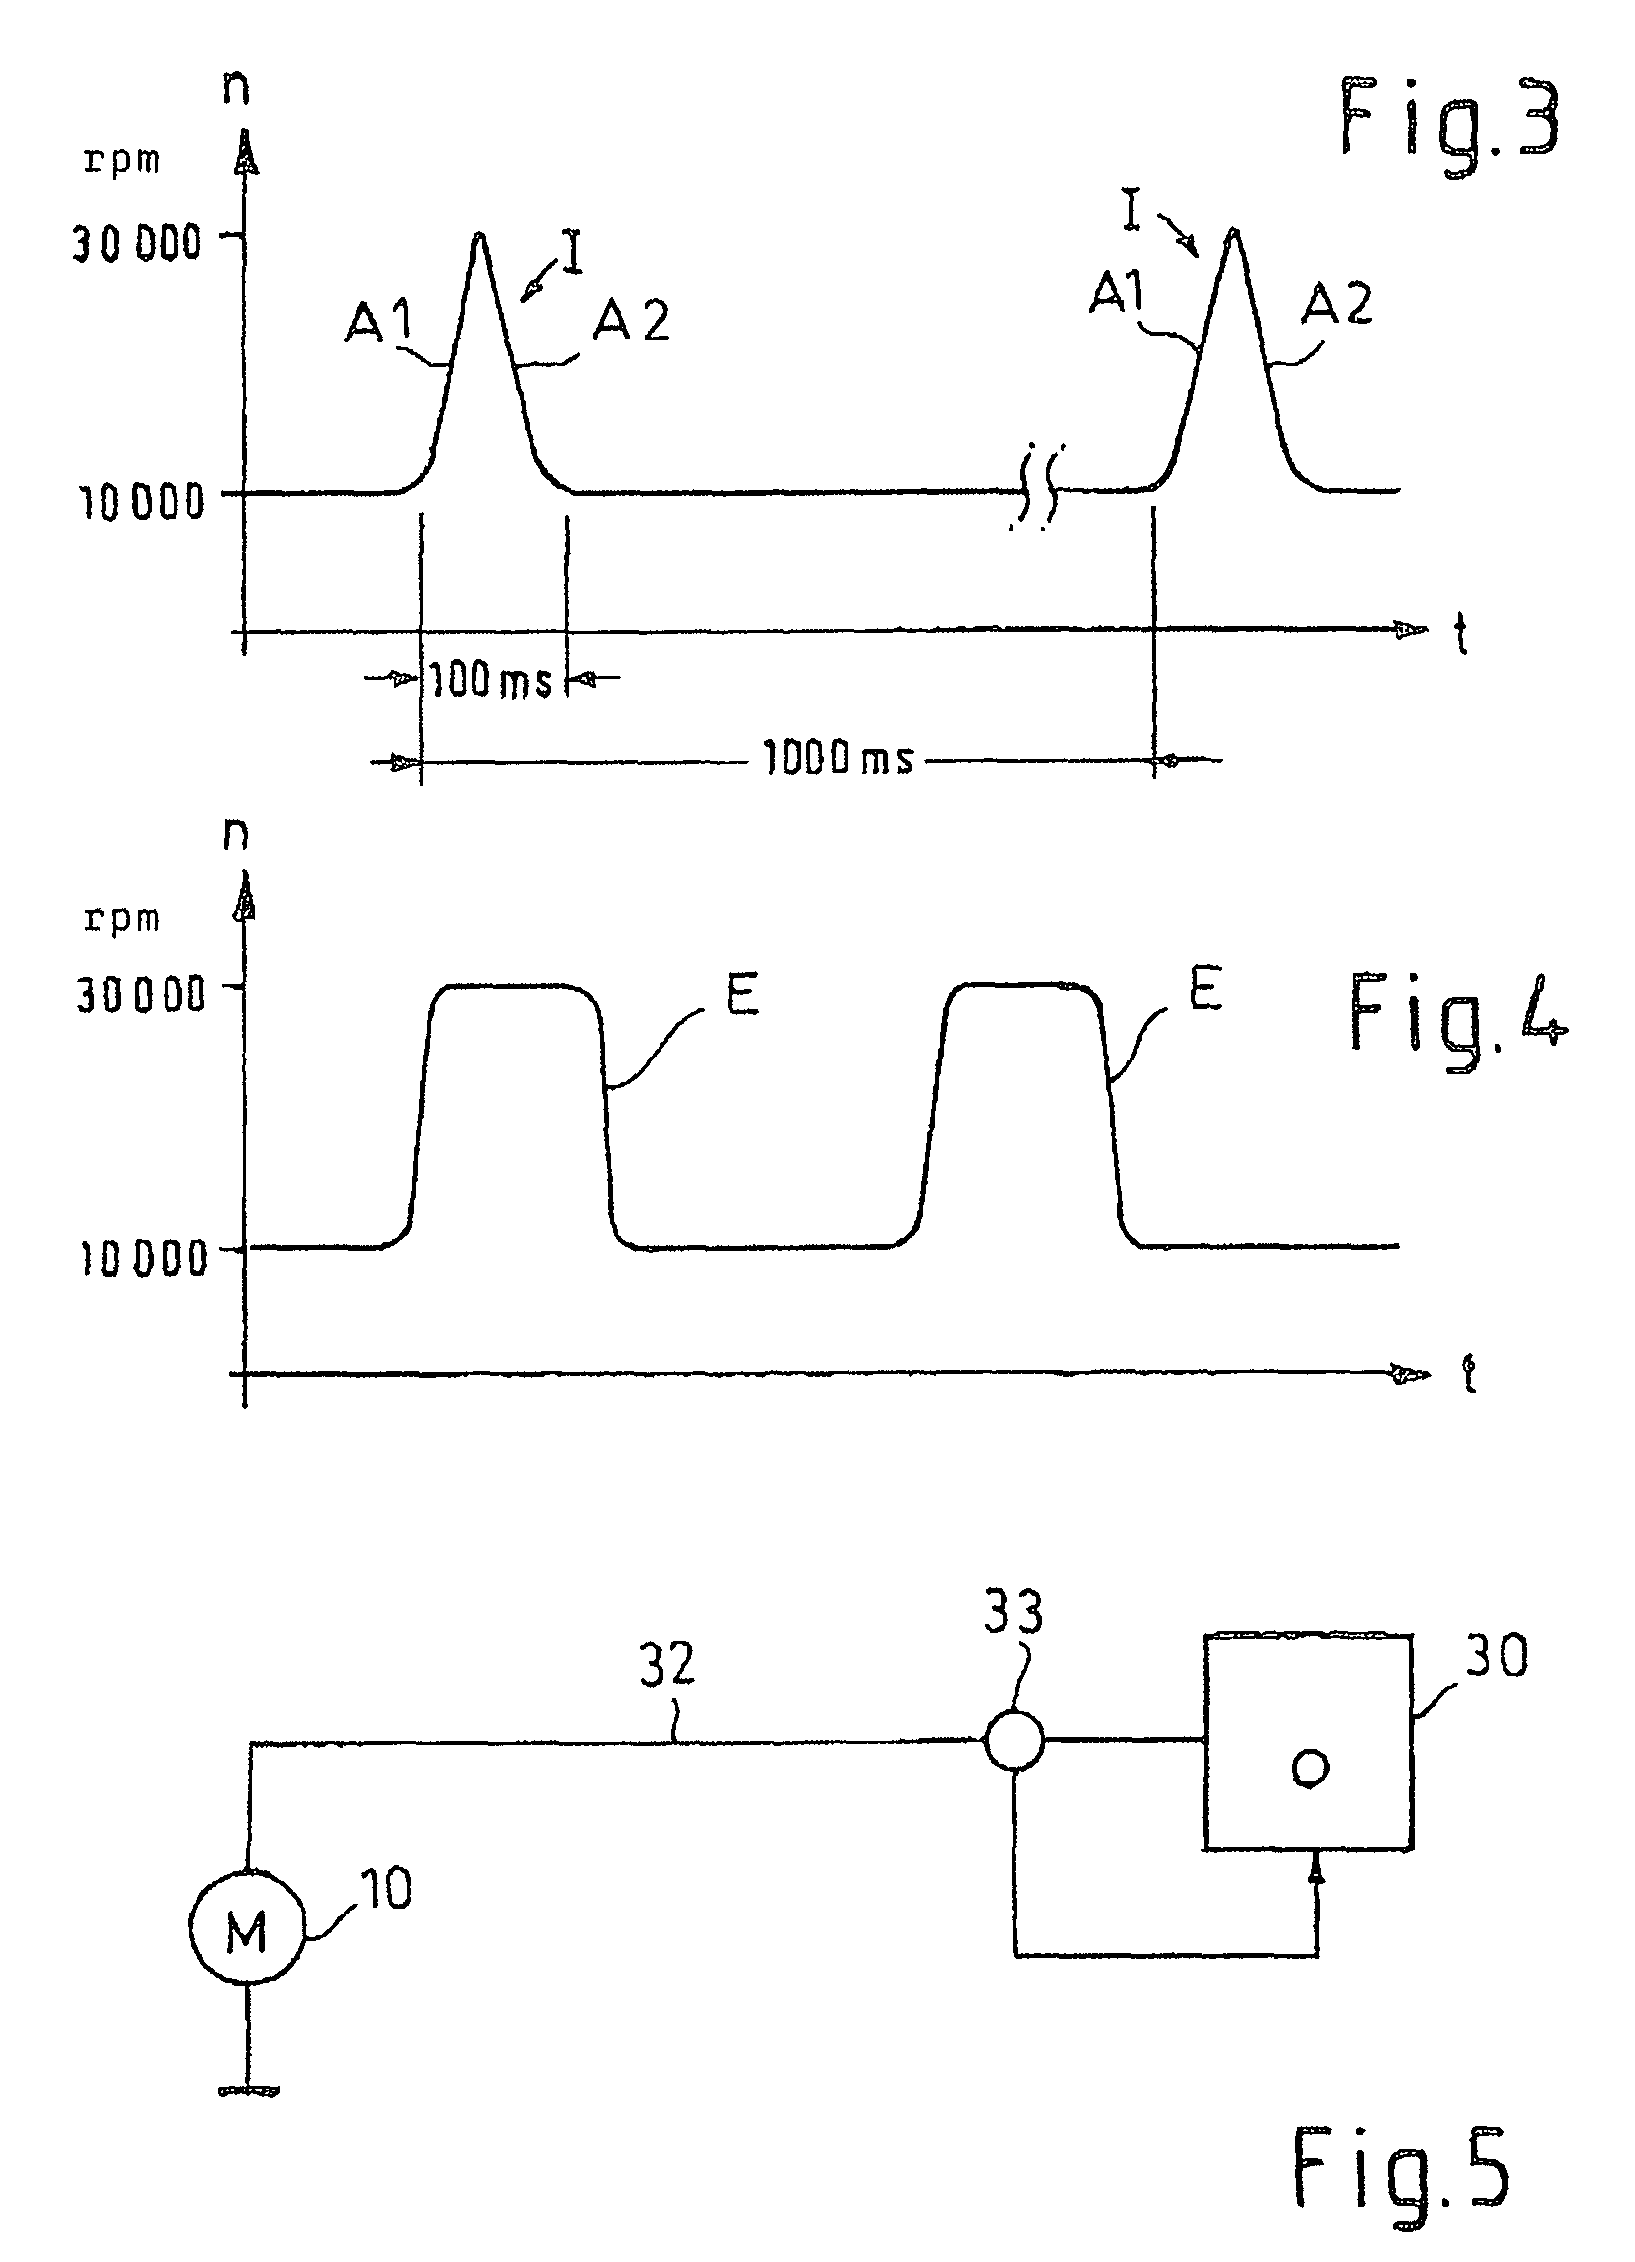 Method for controlling a blood pump